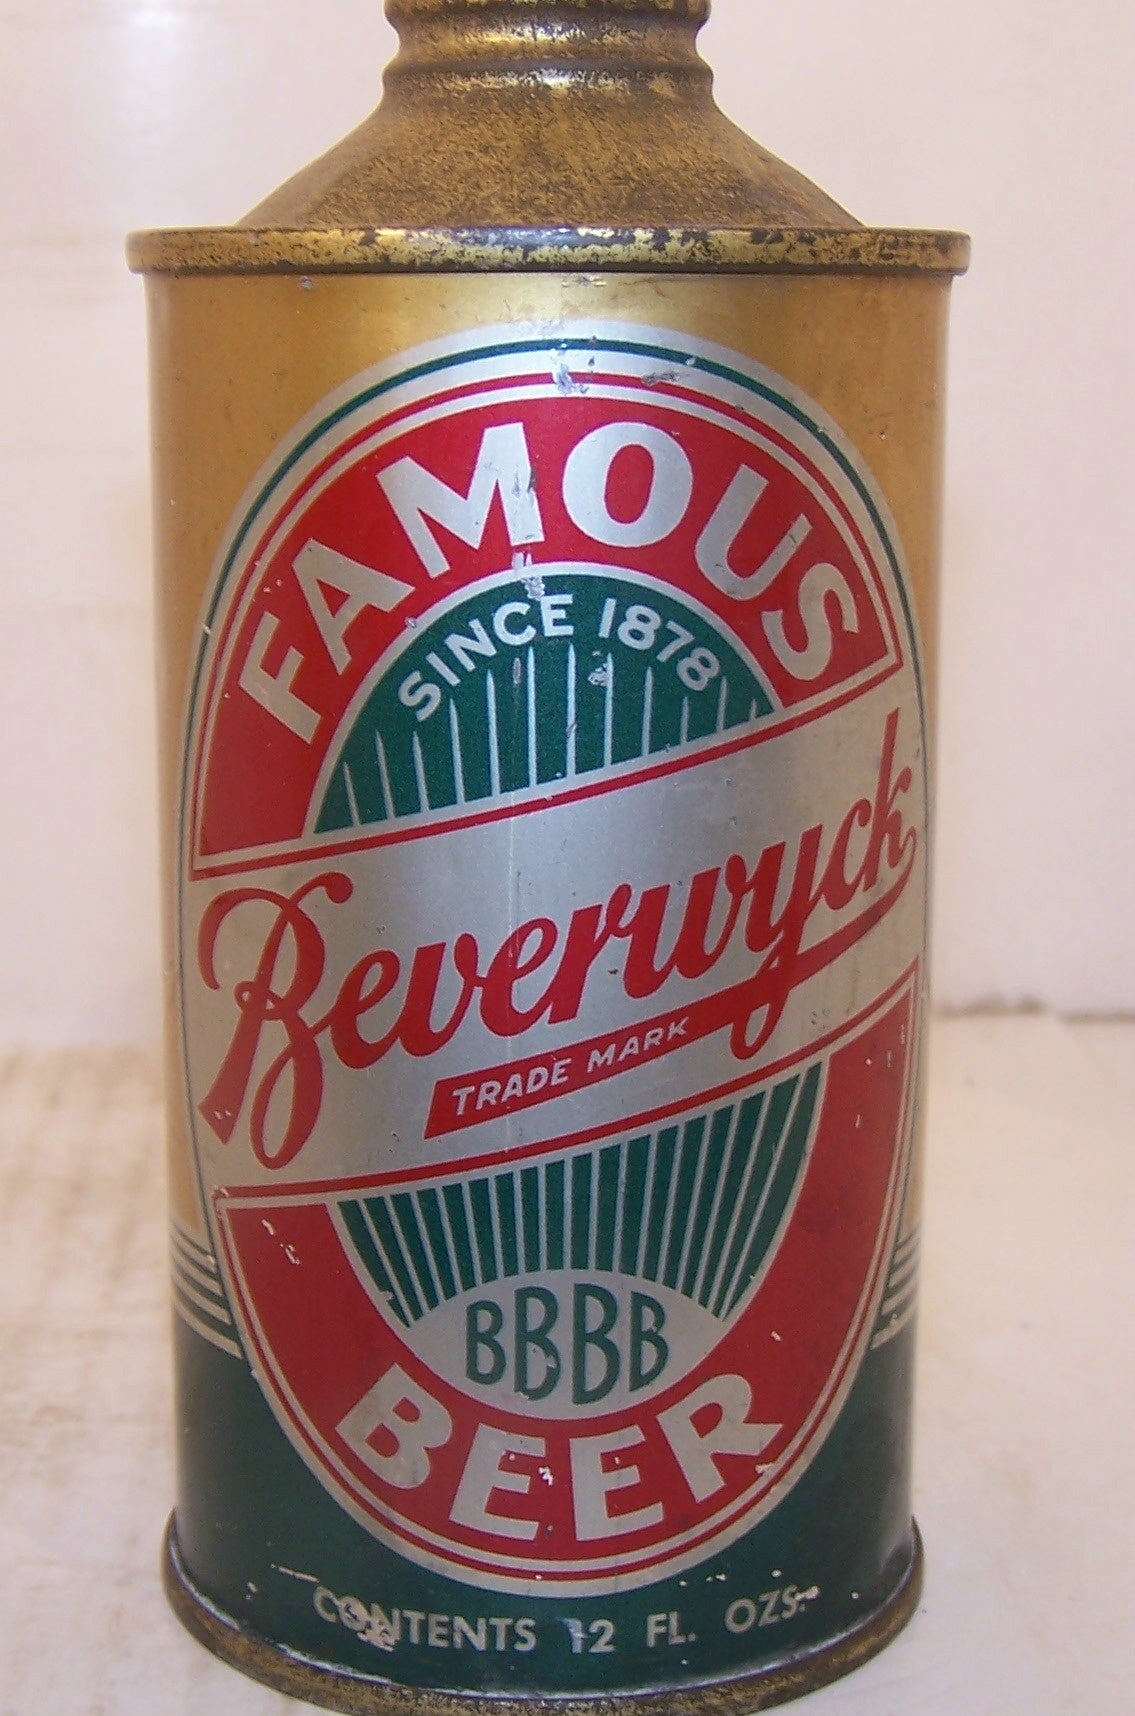 Beverwyck Famous Beer, USBC 152-11 Grade 1/1- Traded on 2/22/15